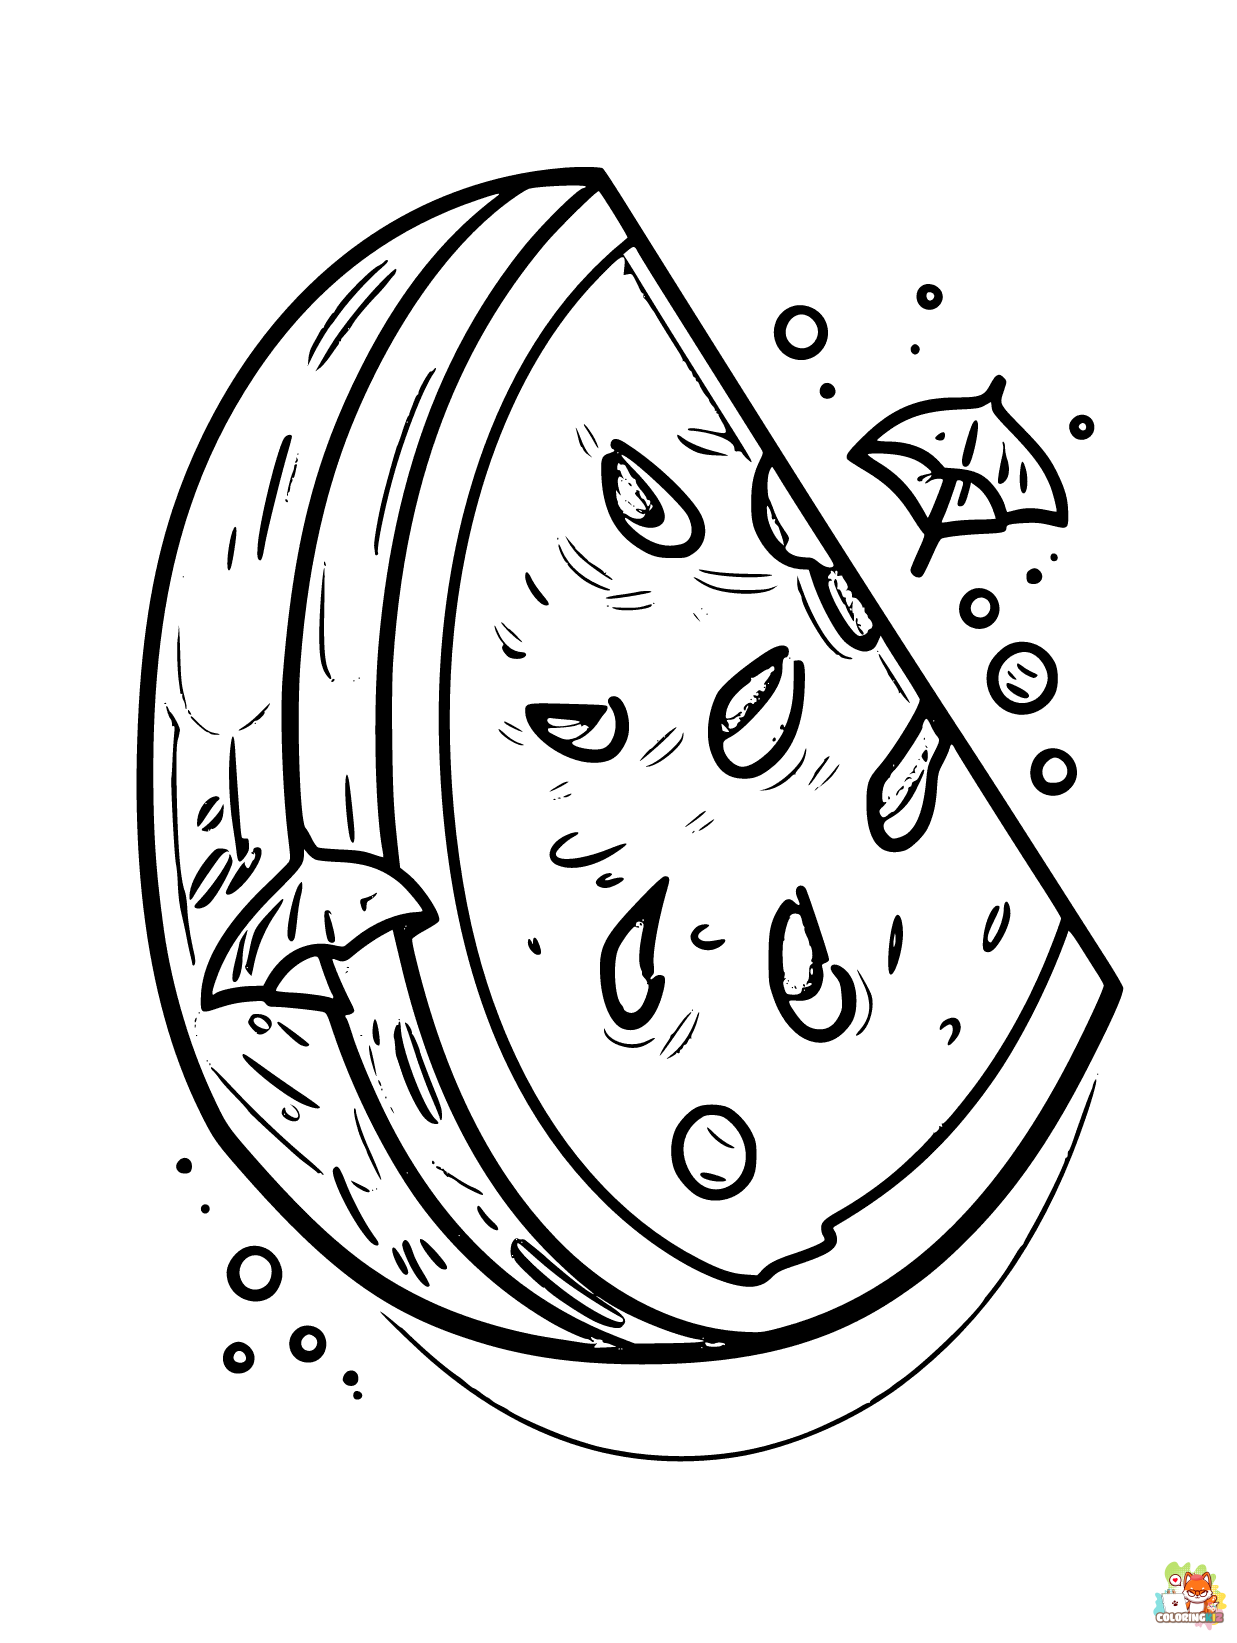 Watermelon coloring pages printable free